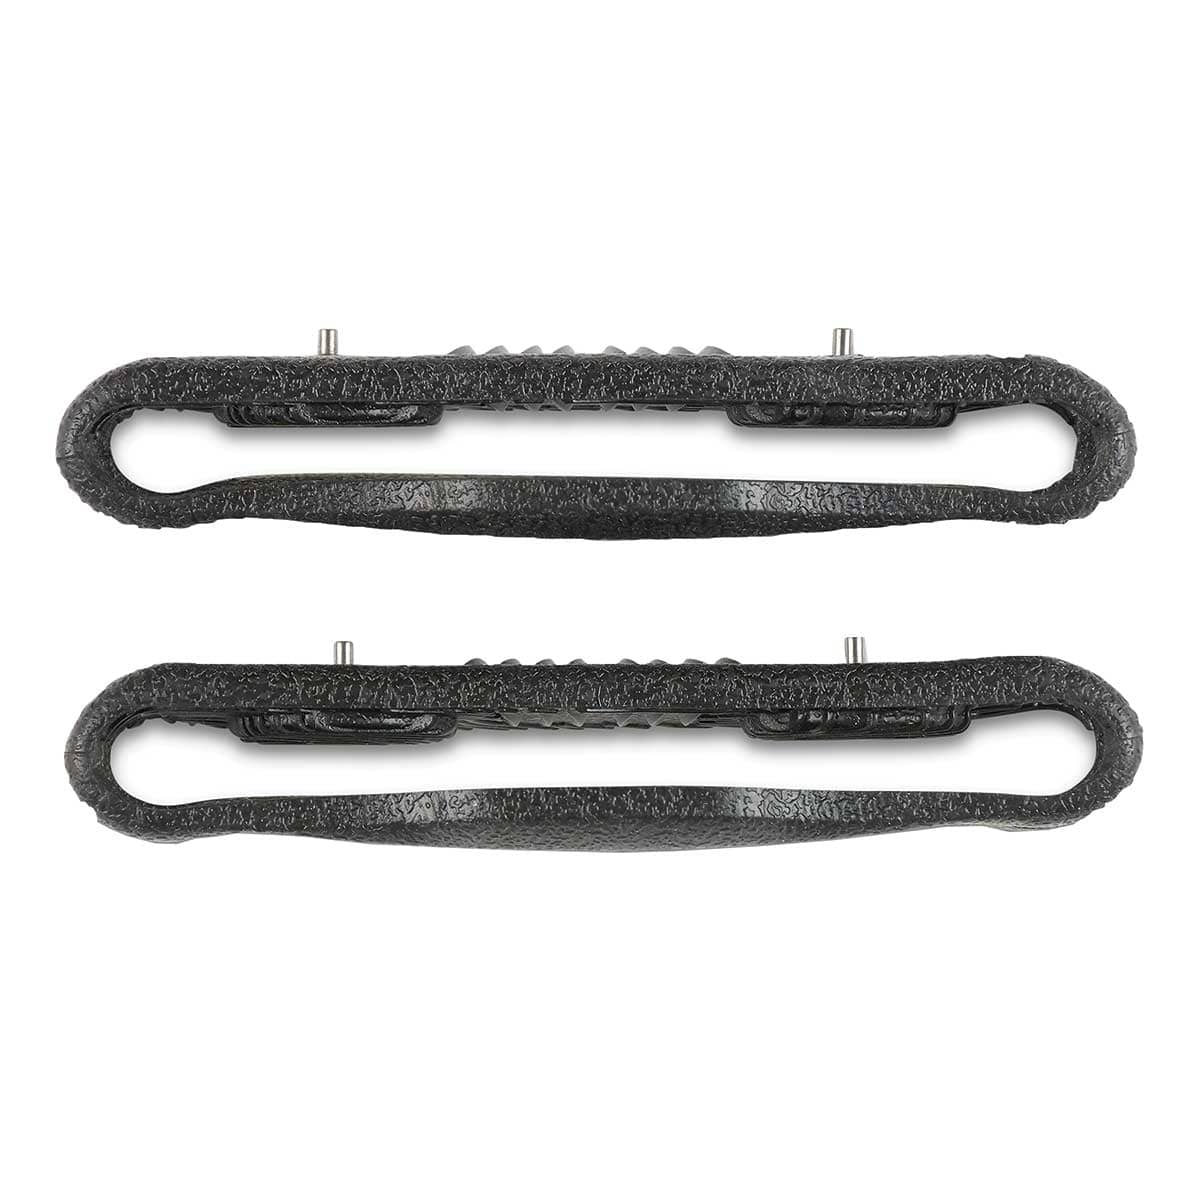 Yaktrax QUIK TRAX Traction Device